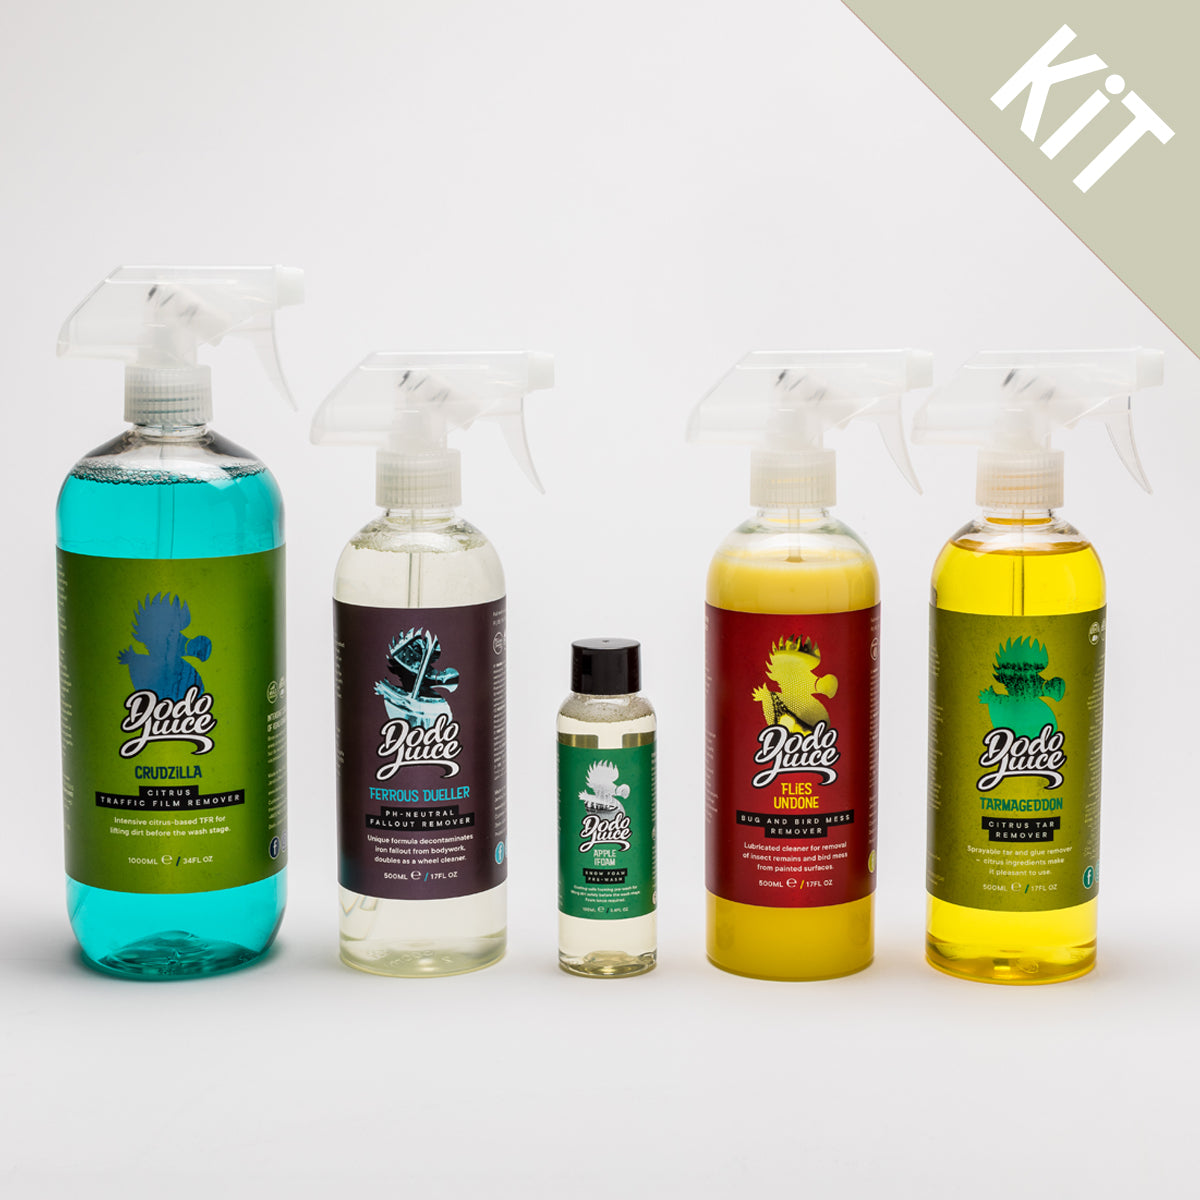 Heavy Hitters - pre-wash and decontamination bundle (5 items) £7 saving HS 3405300000